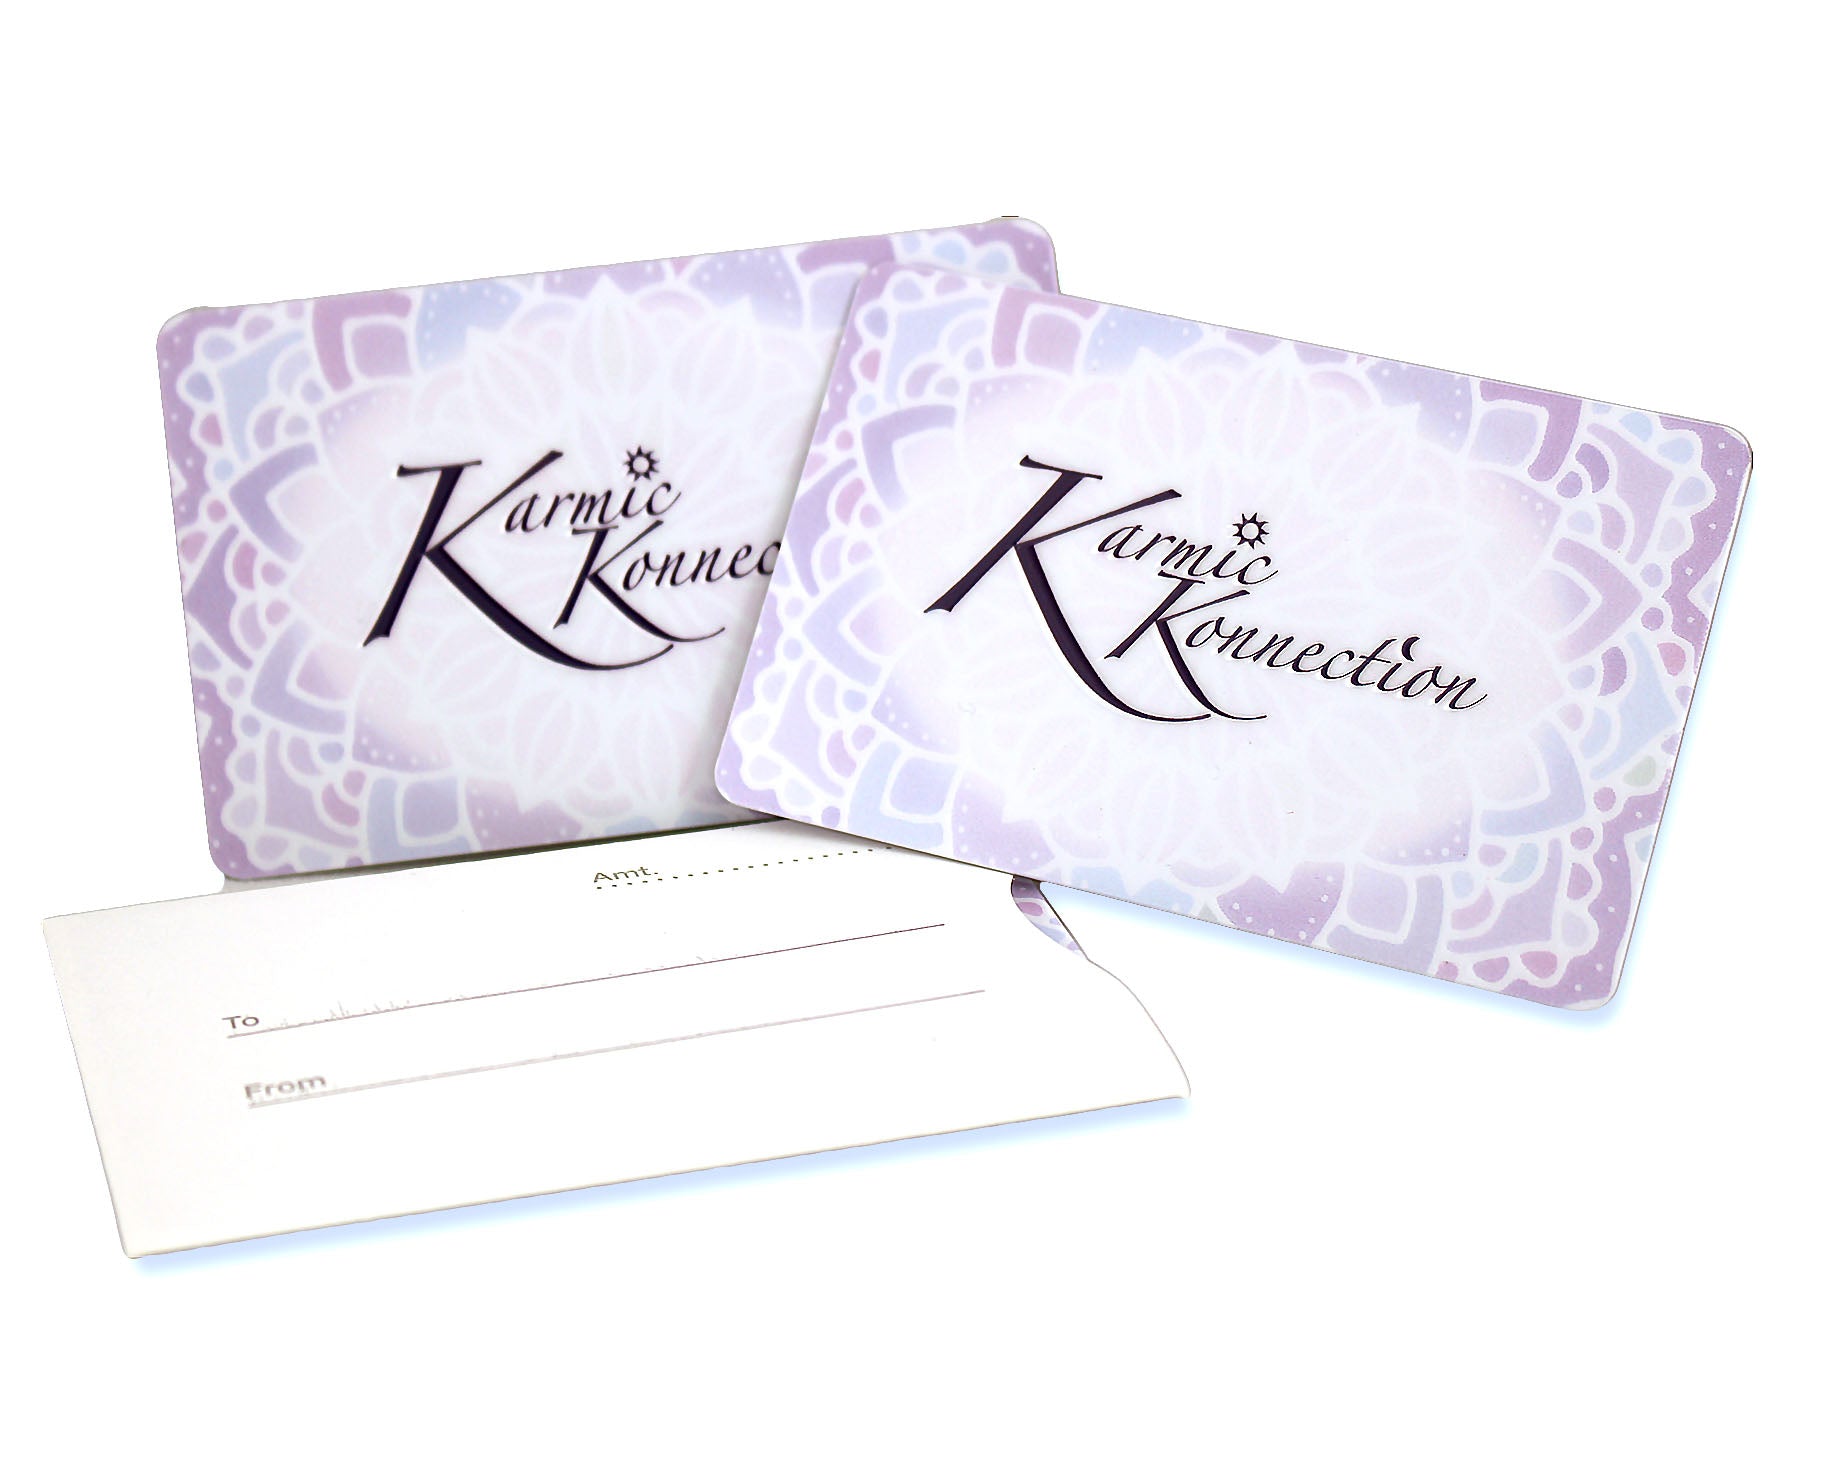 Karmic Konnection physical gift cards with sleeve